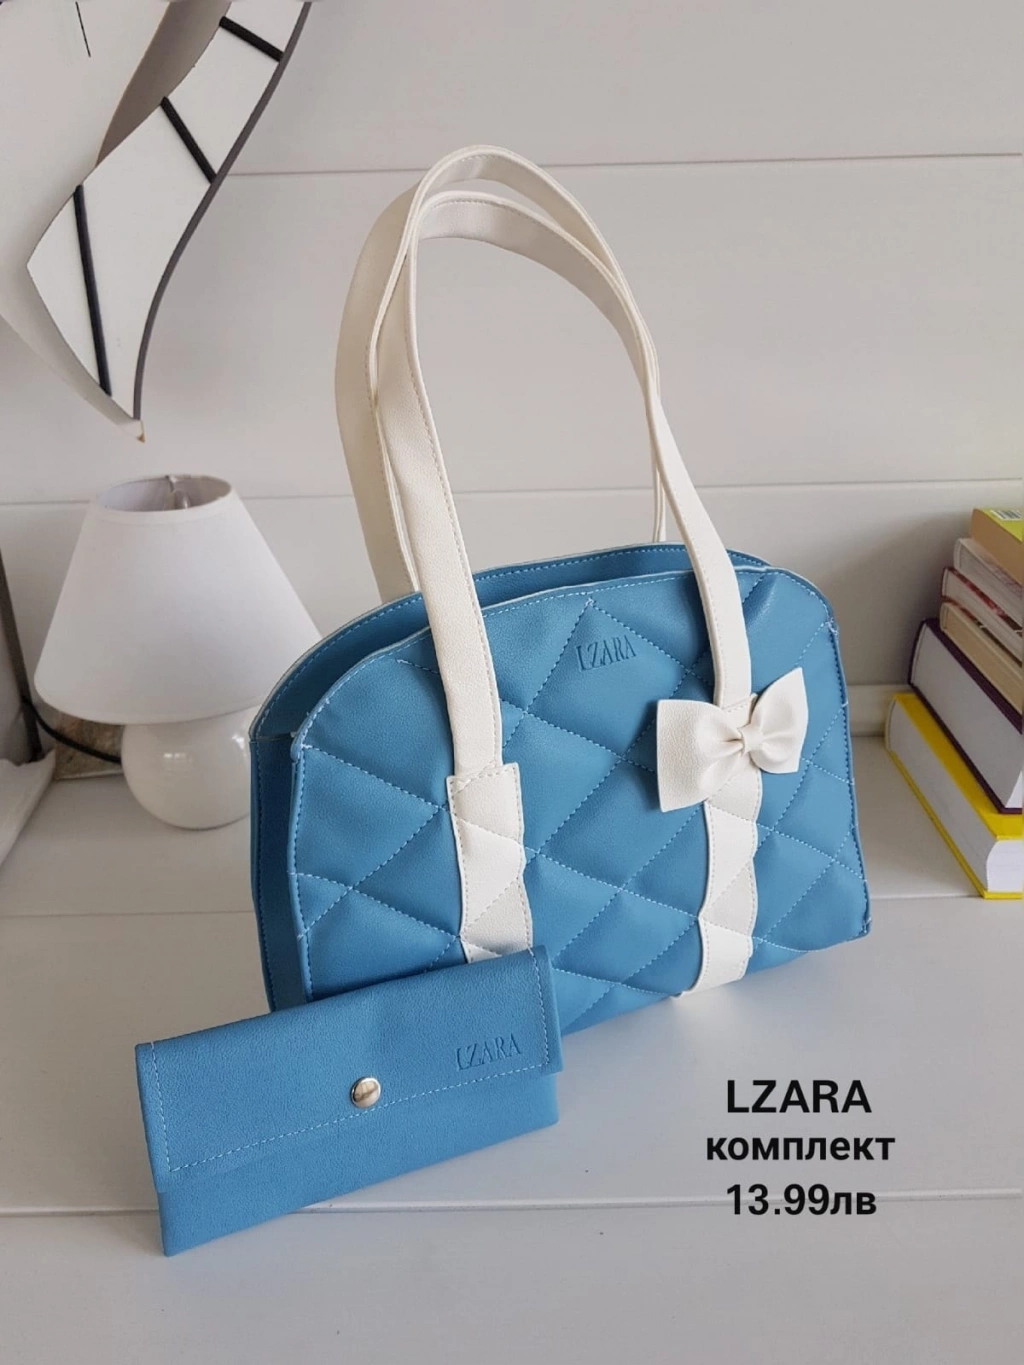 Blue bag with purse